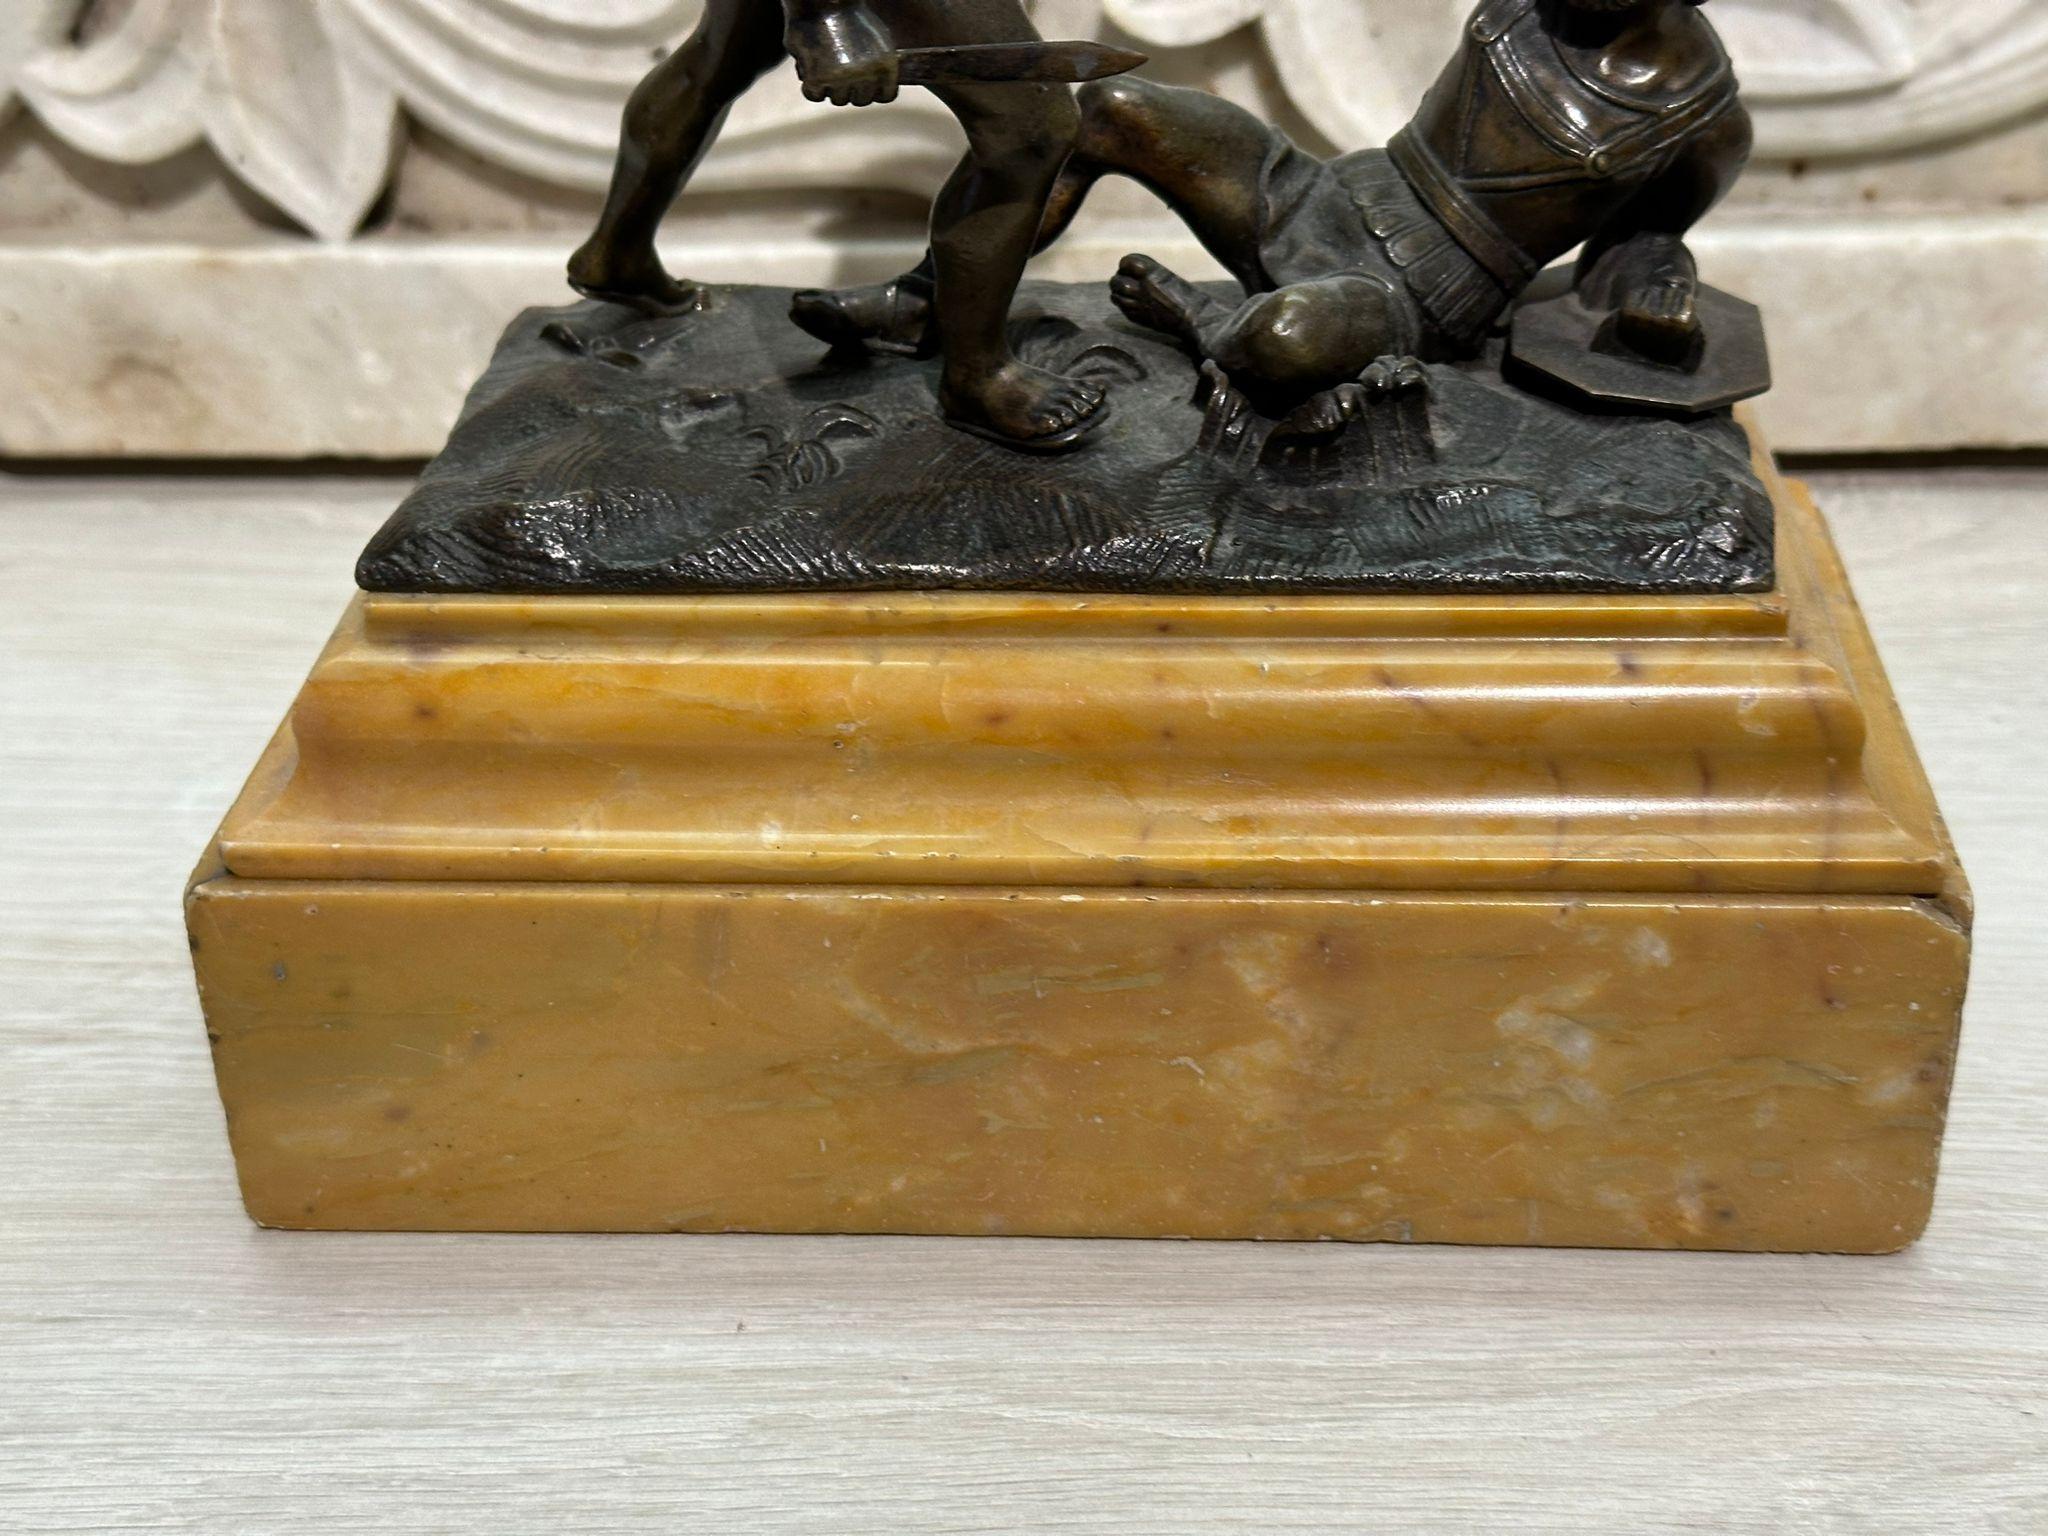 Beautiful Italian Bronze Sculpture of Gladiators on a Marble Base 19th Century

Dimensions

25x20 cm

very good condition
